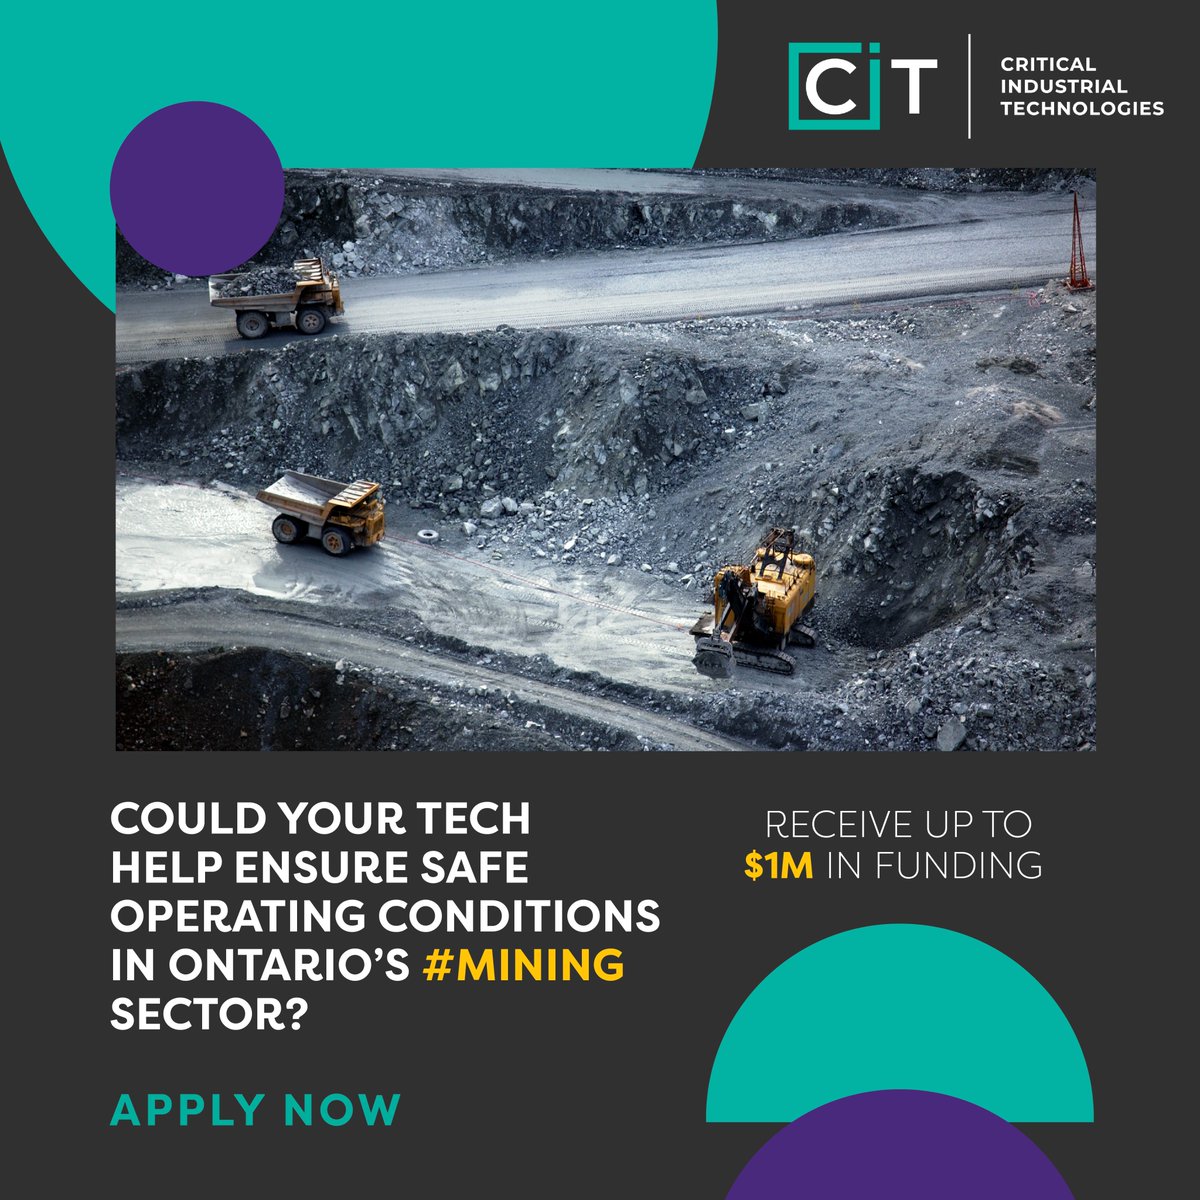 CALL FOR APPLICATIONS❗

Could your tech help ensure safe operating conditions in Ontario’s #mining sector?

Learn how you could receive up to $1M in project funding through our CIT initiative.

Deadline to apply is June 28th

Apply Now: oc-innovation.ca/programs/cit/#…

Press Release: